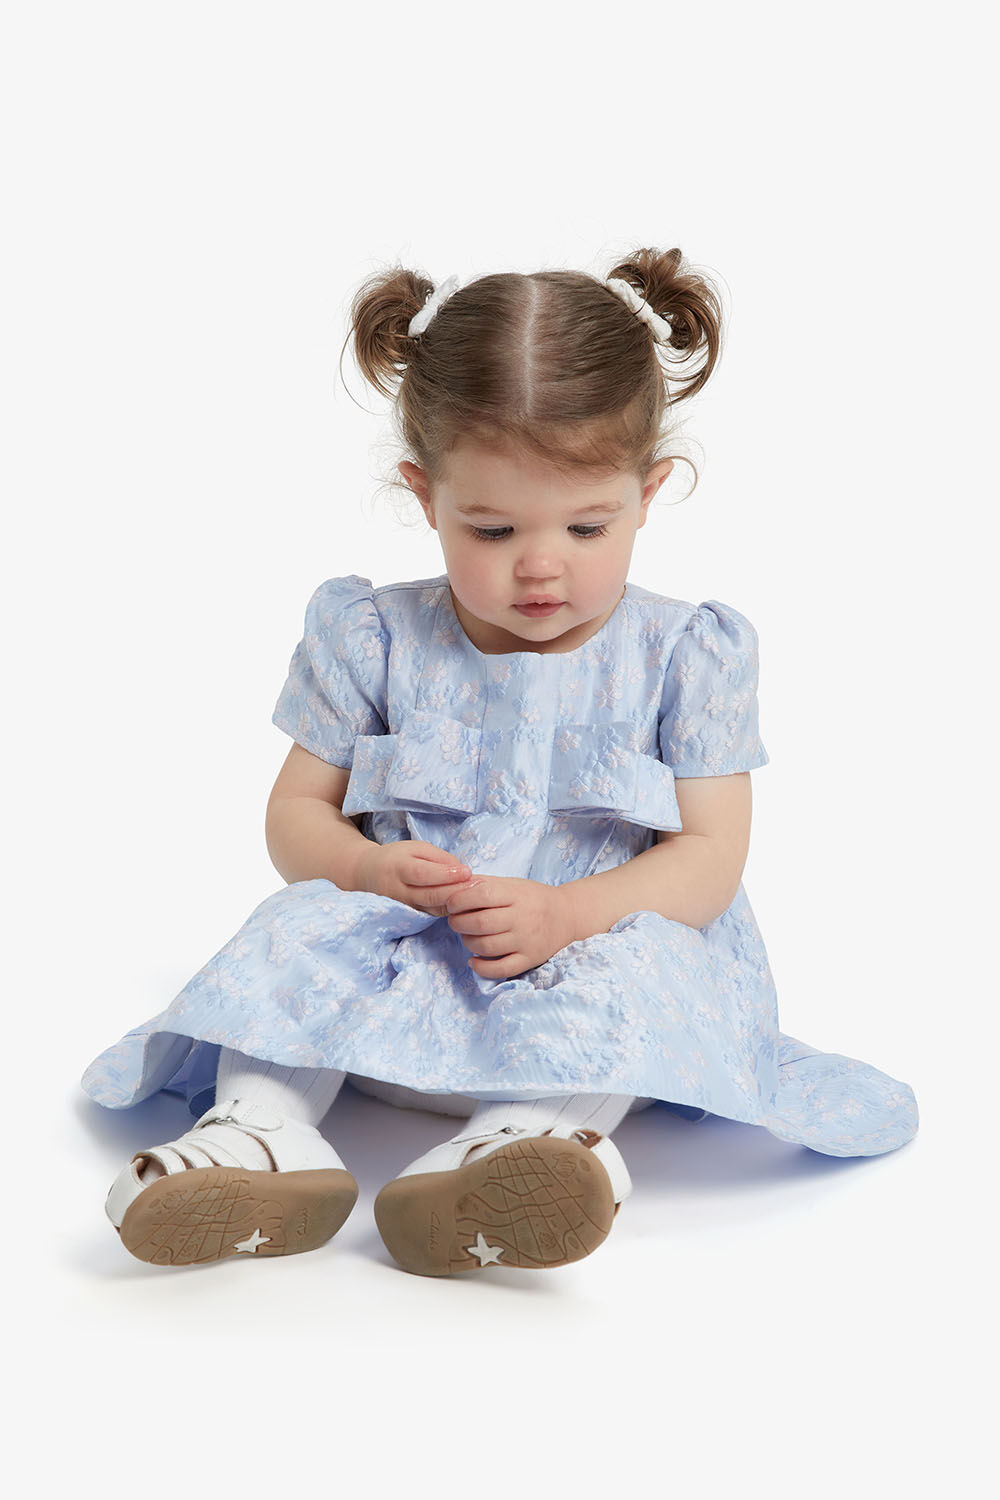 BABY GIRL MEADOW BOW DRESS in colour BABY BLUE